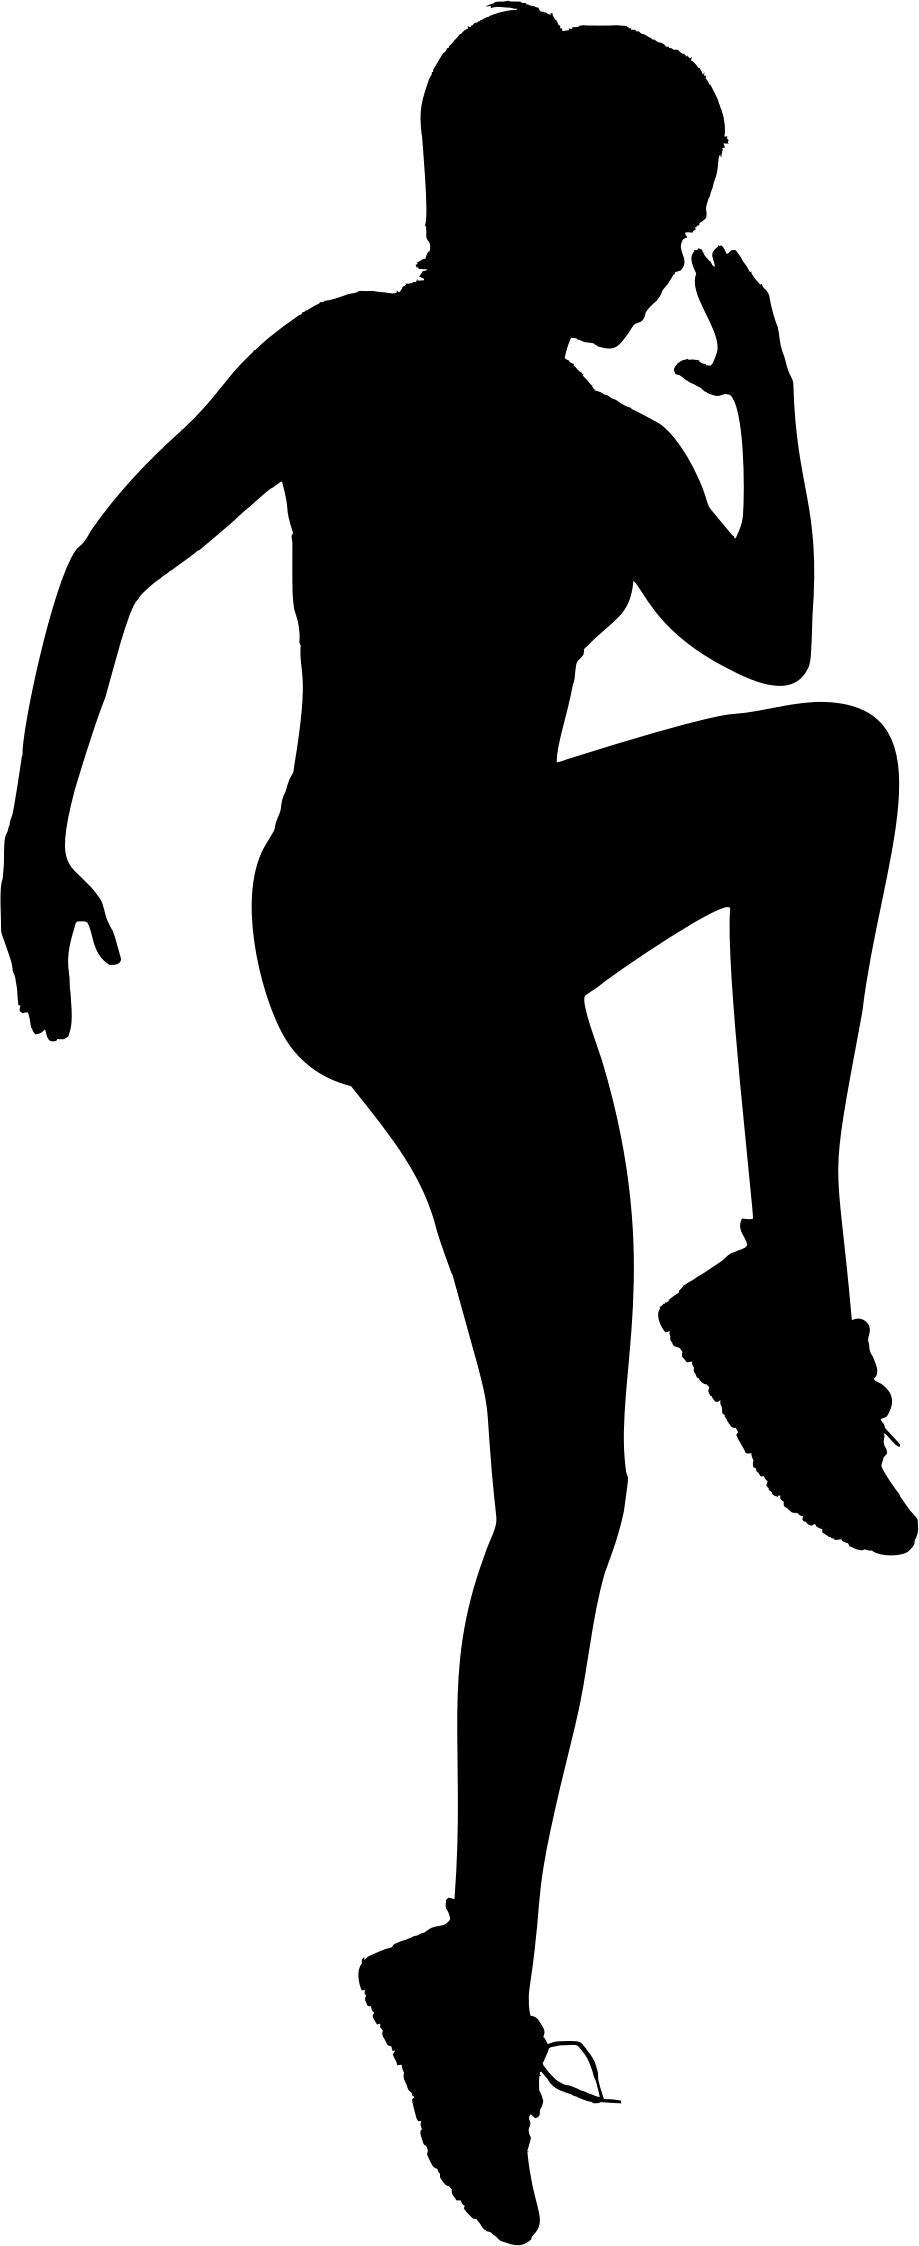 Woman Exercising Silhouette png transparent